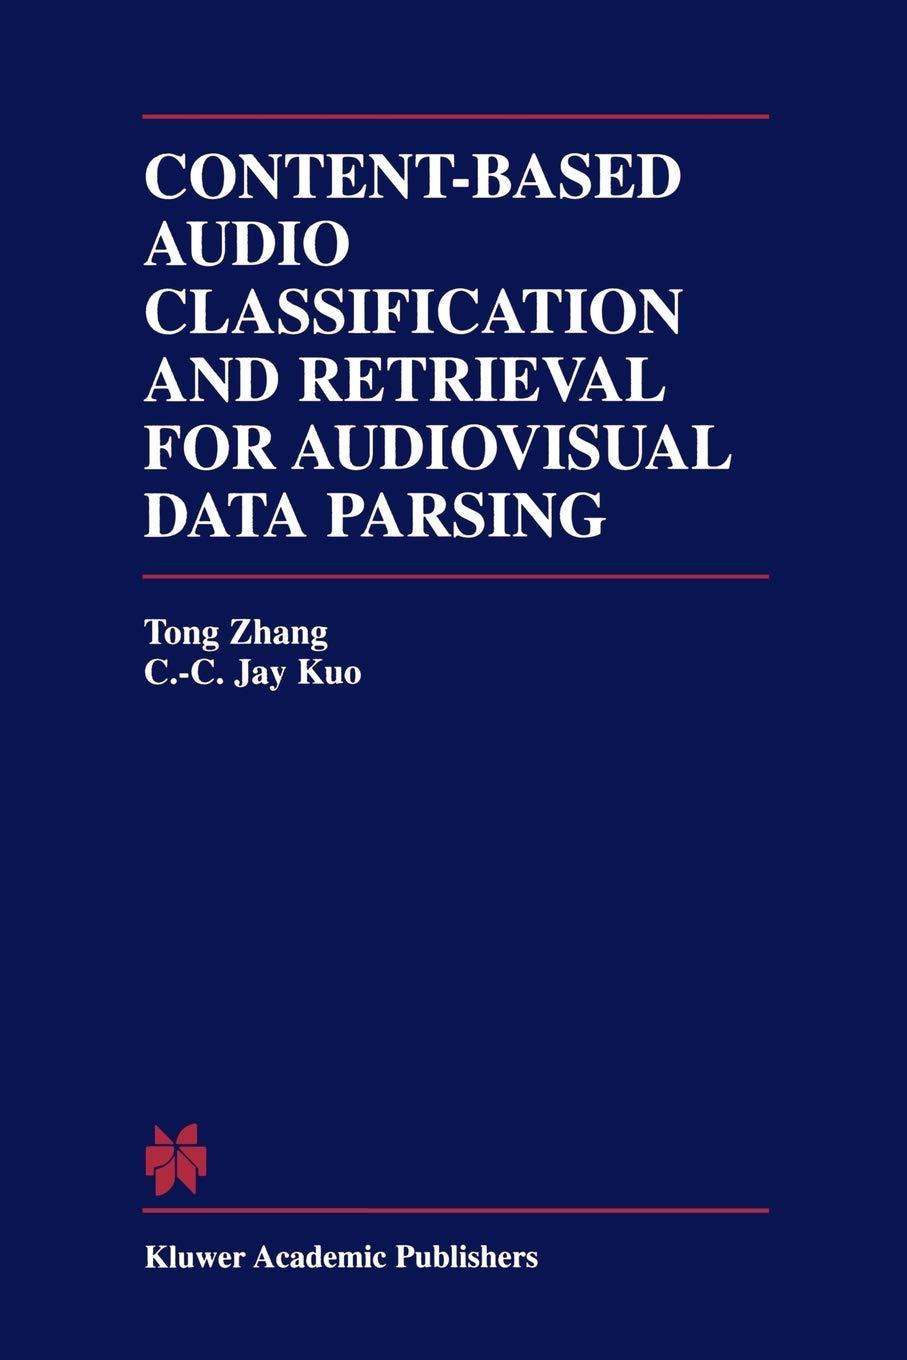 content based audio classification and retrieval for audiovisual data parsing 2001 edition tong zhang, c.c.